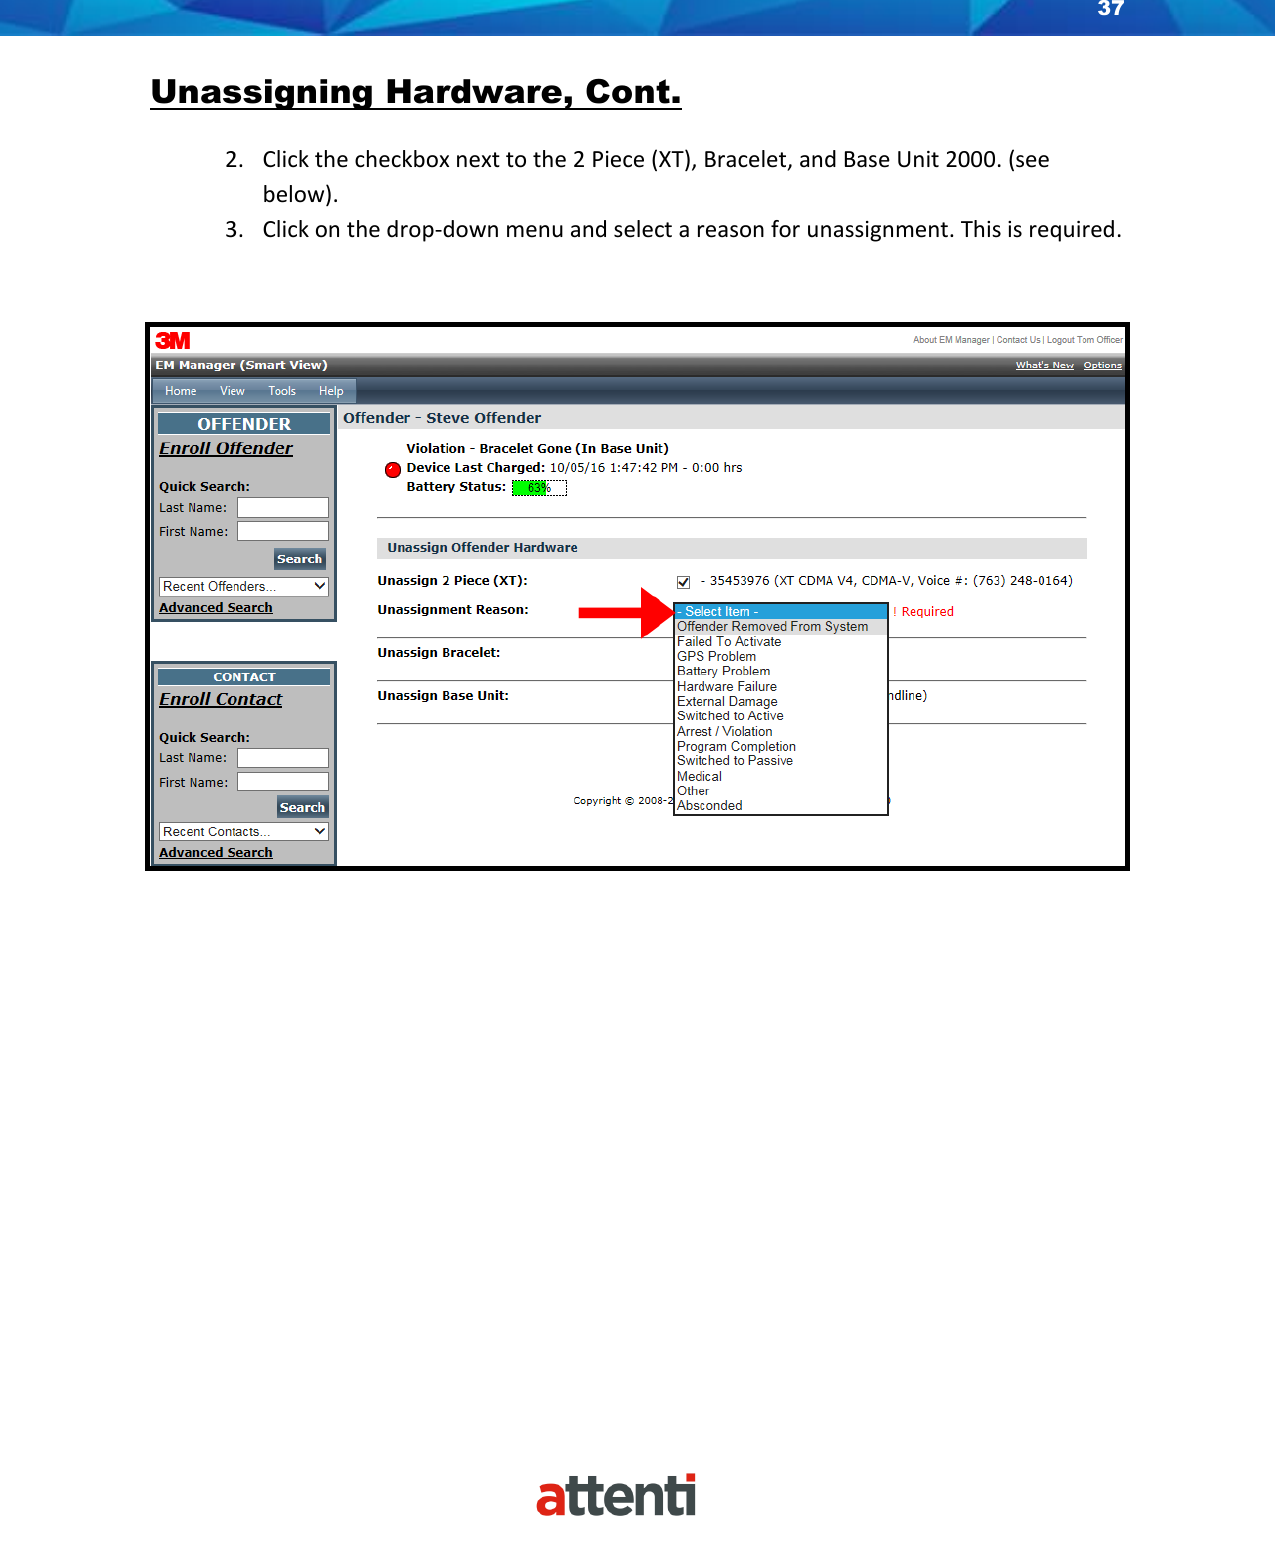 37    Unassigning Hardware, Cont. 2. Click the checkbox next to the 2 Piece (XT), Bracelet, and Base Unit 2000. (see below). 3. Click on the drop-down menu and select a reason for unassignment. This is required.   